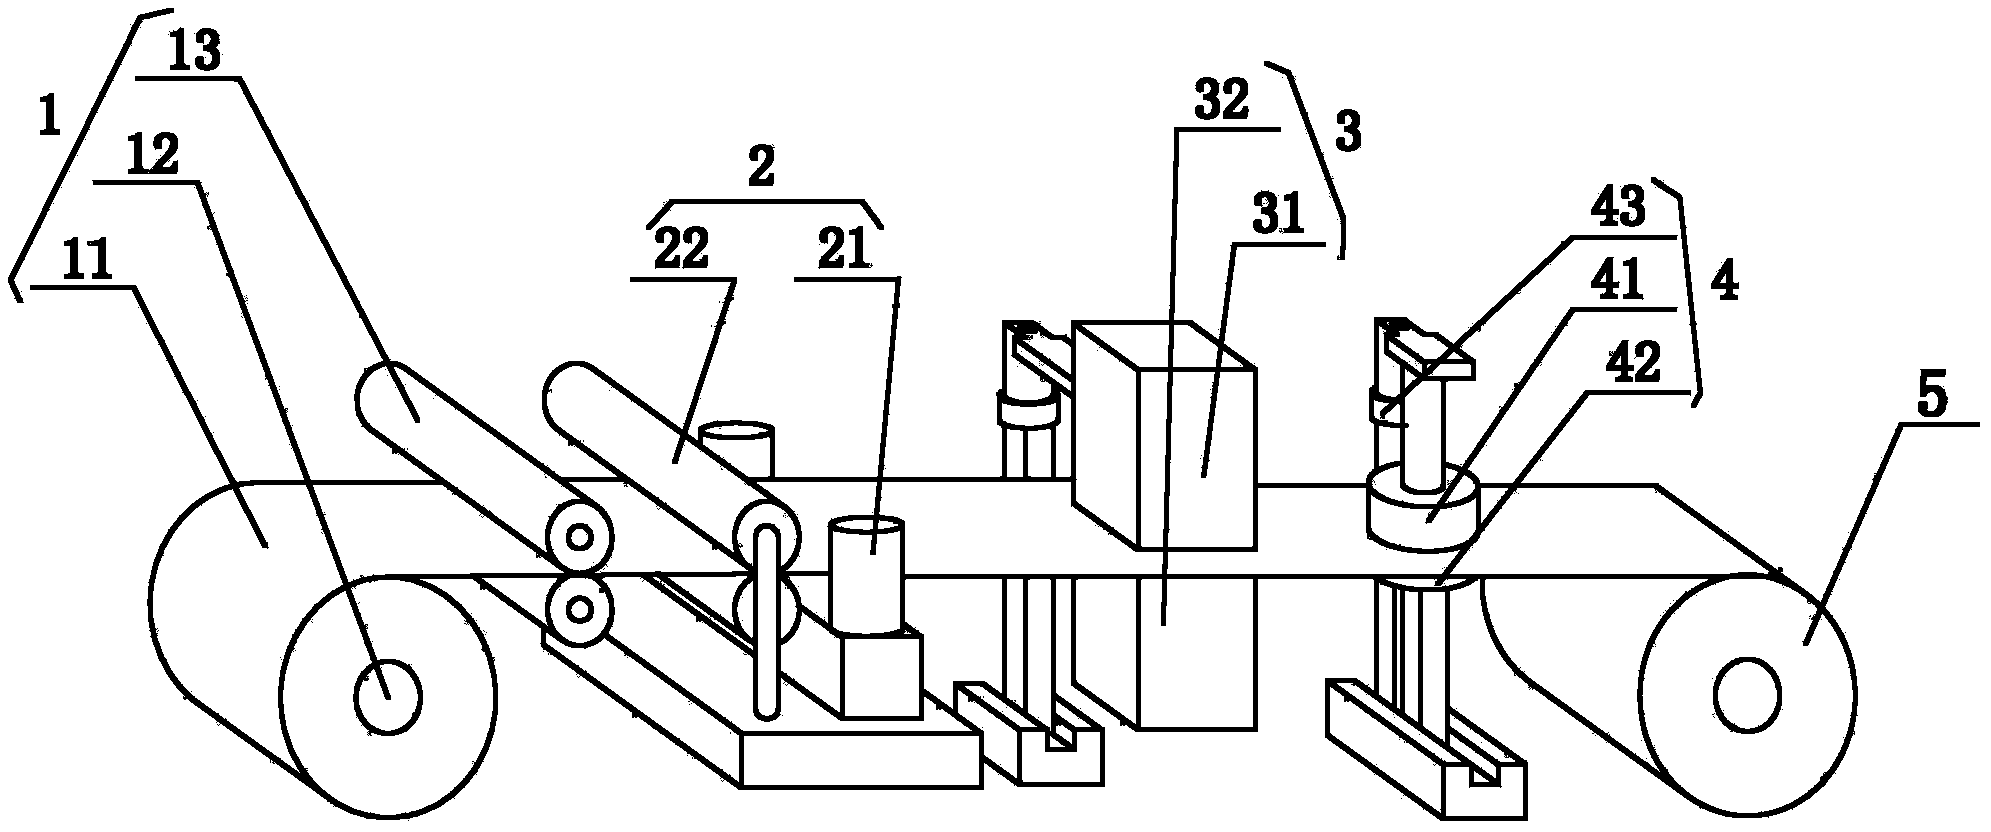 Strip steel surface deformation shaping apparatus